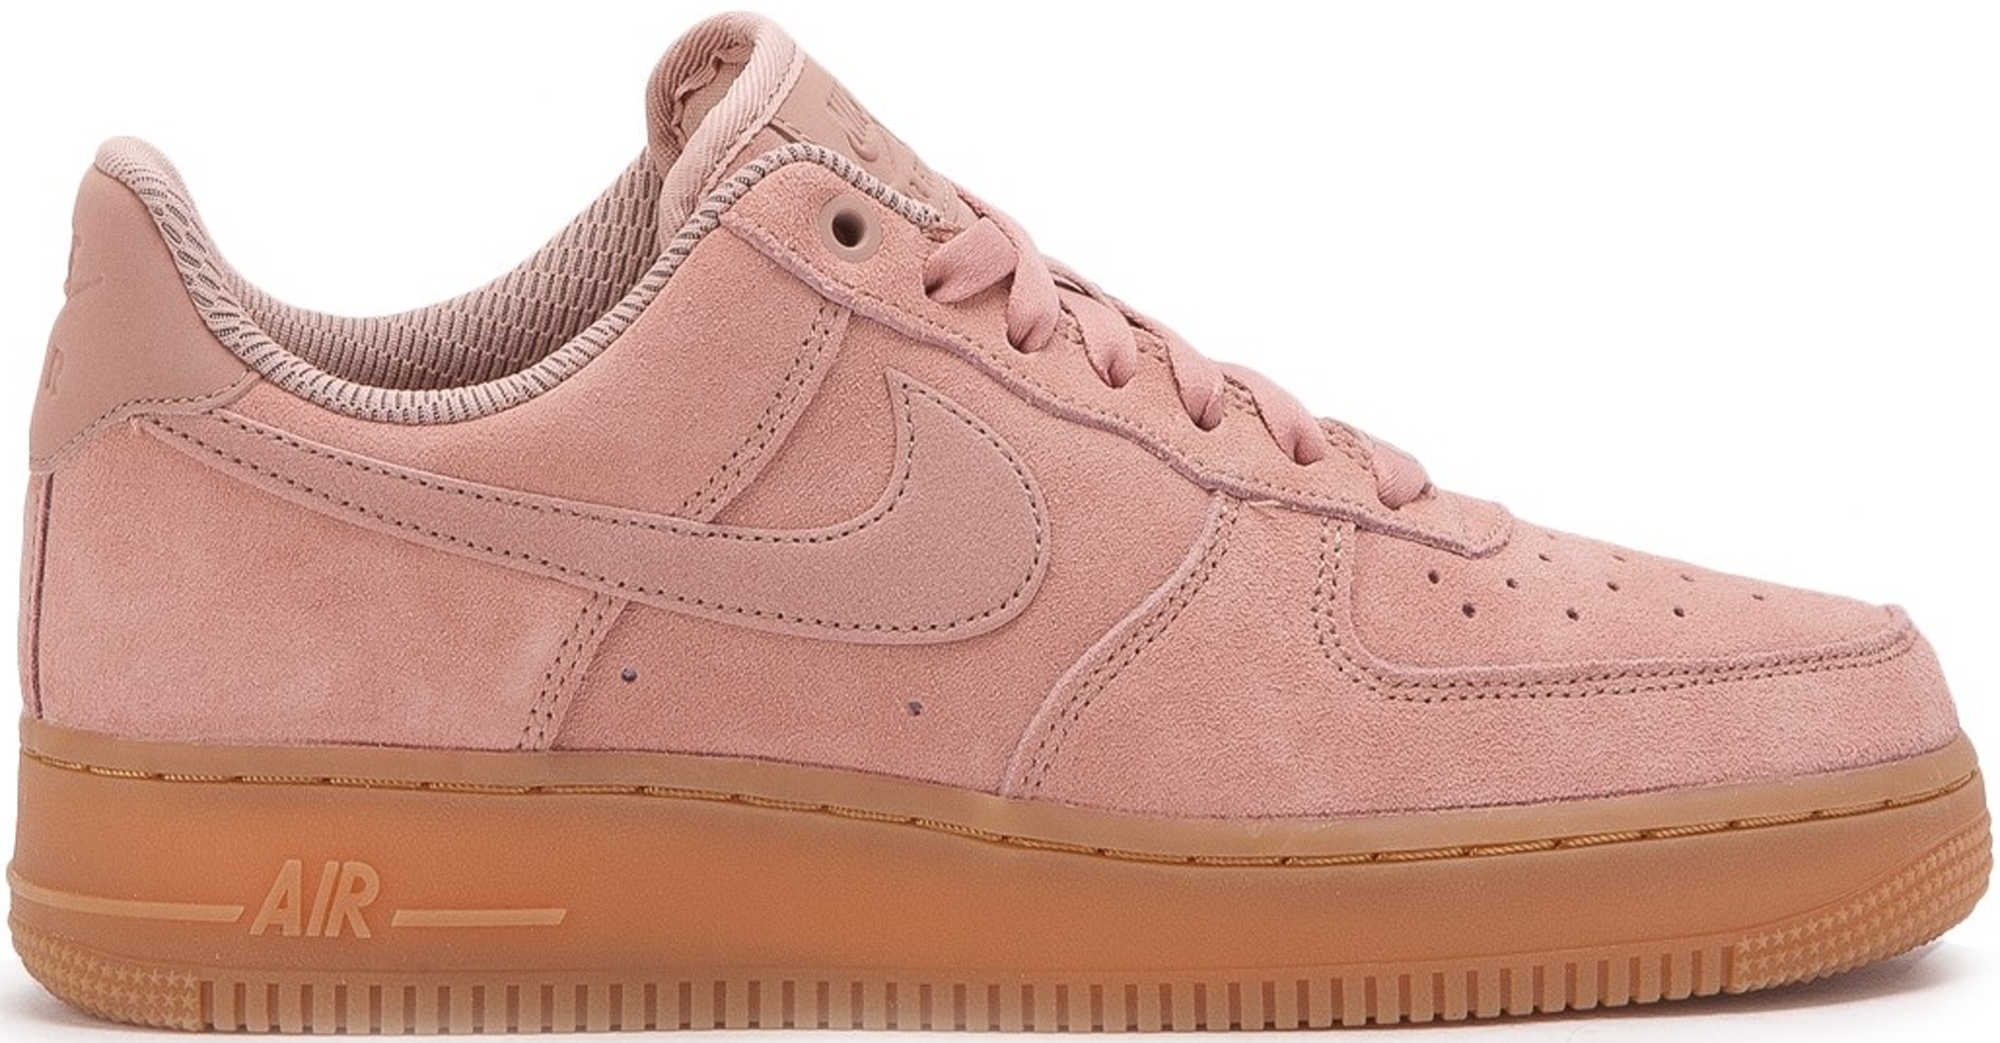 Nike Air Force 1 Low Particle Pink Gum 